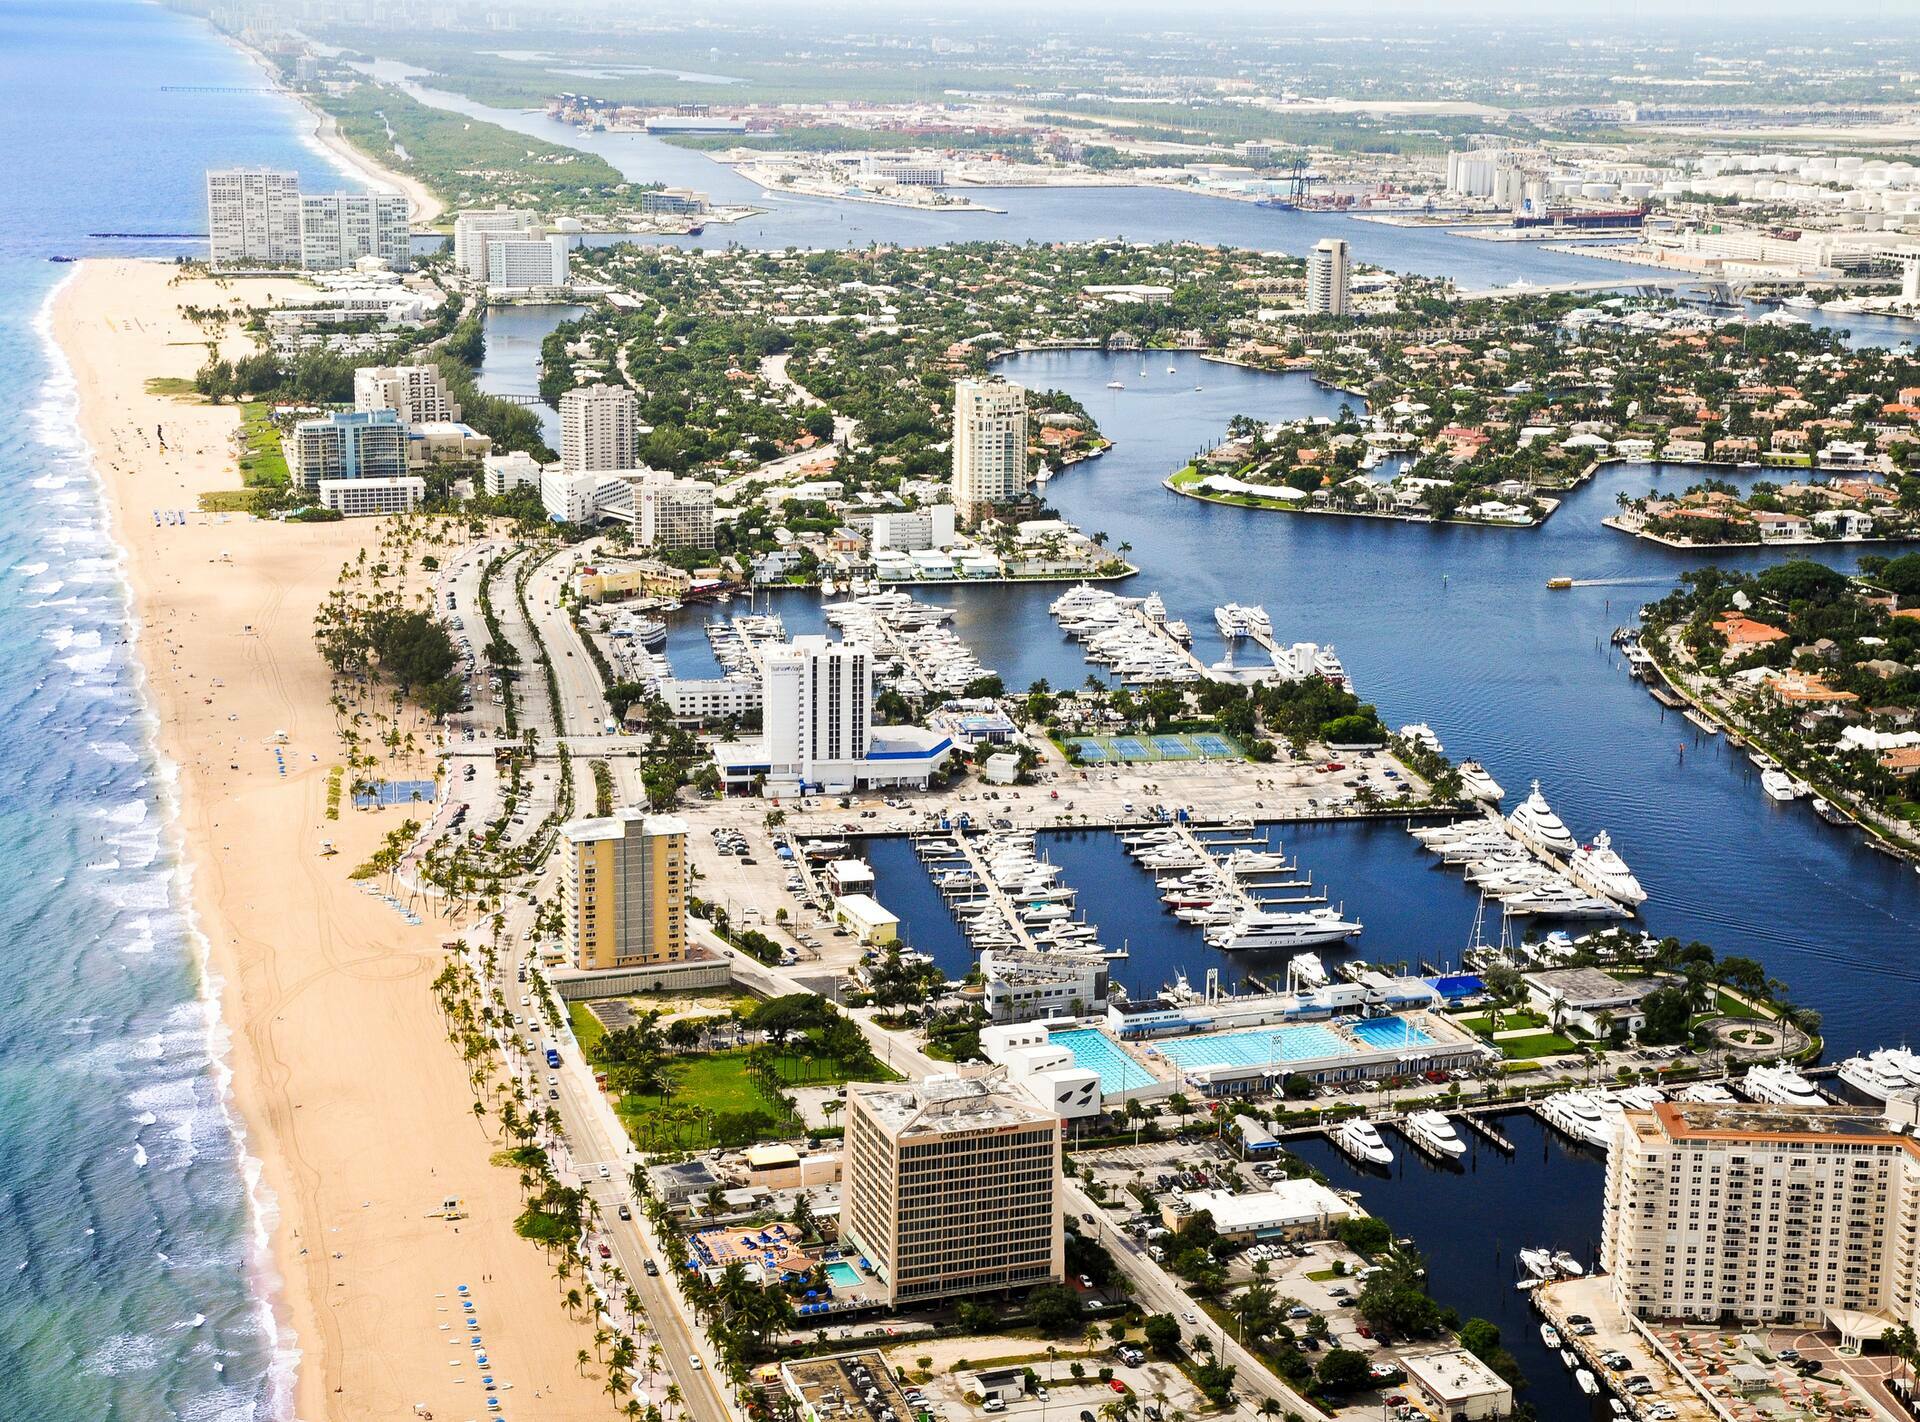 Photo of Bahia Mar Fort Lauderdale Beach - a DoubleTree by Hilton Hotel, Fort Lauderdale, FL